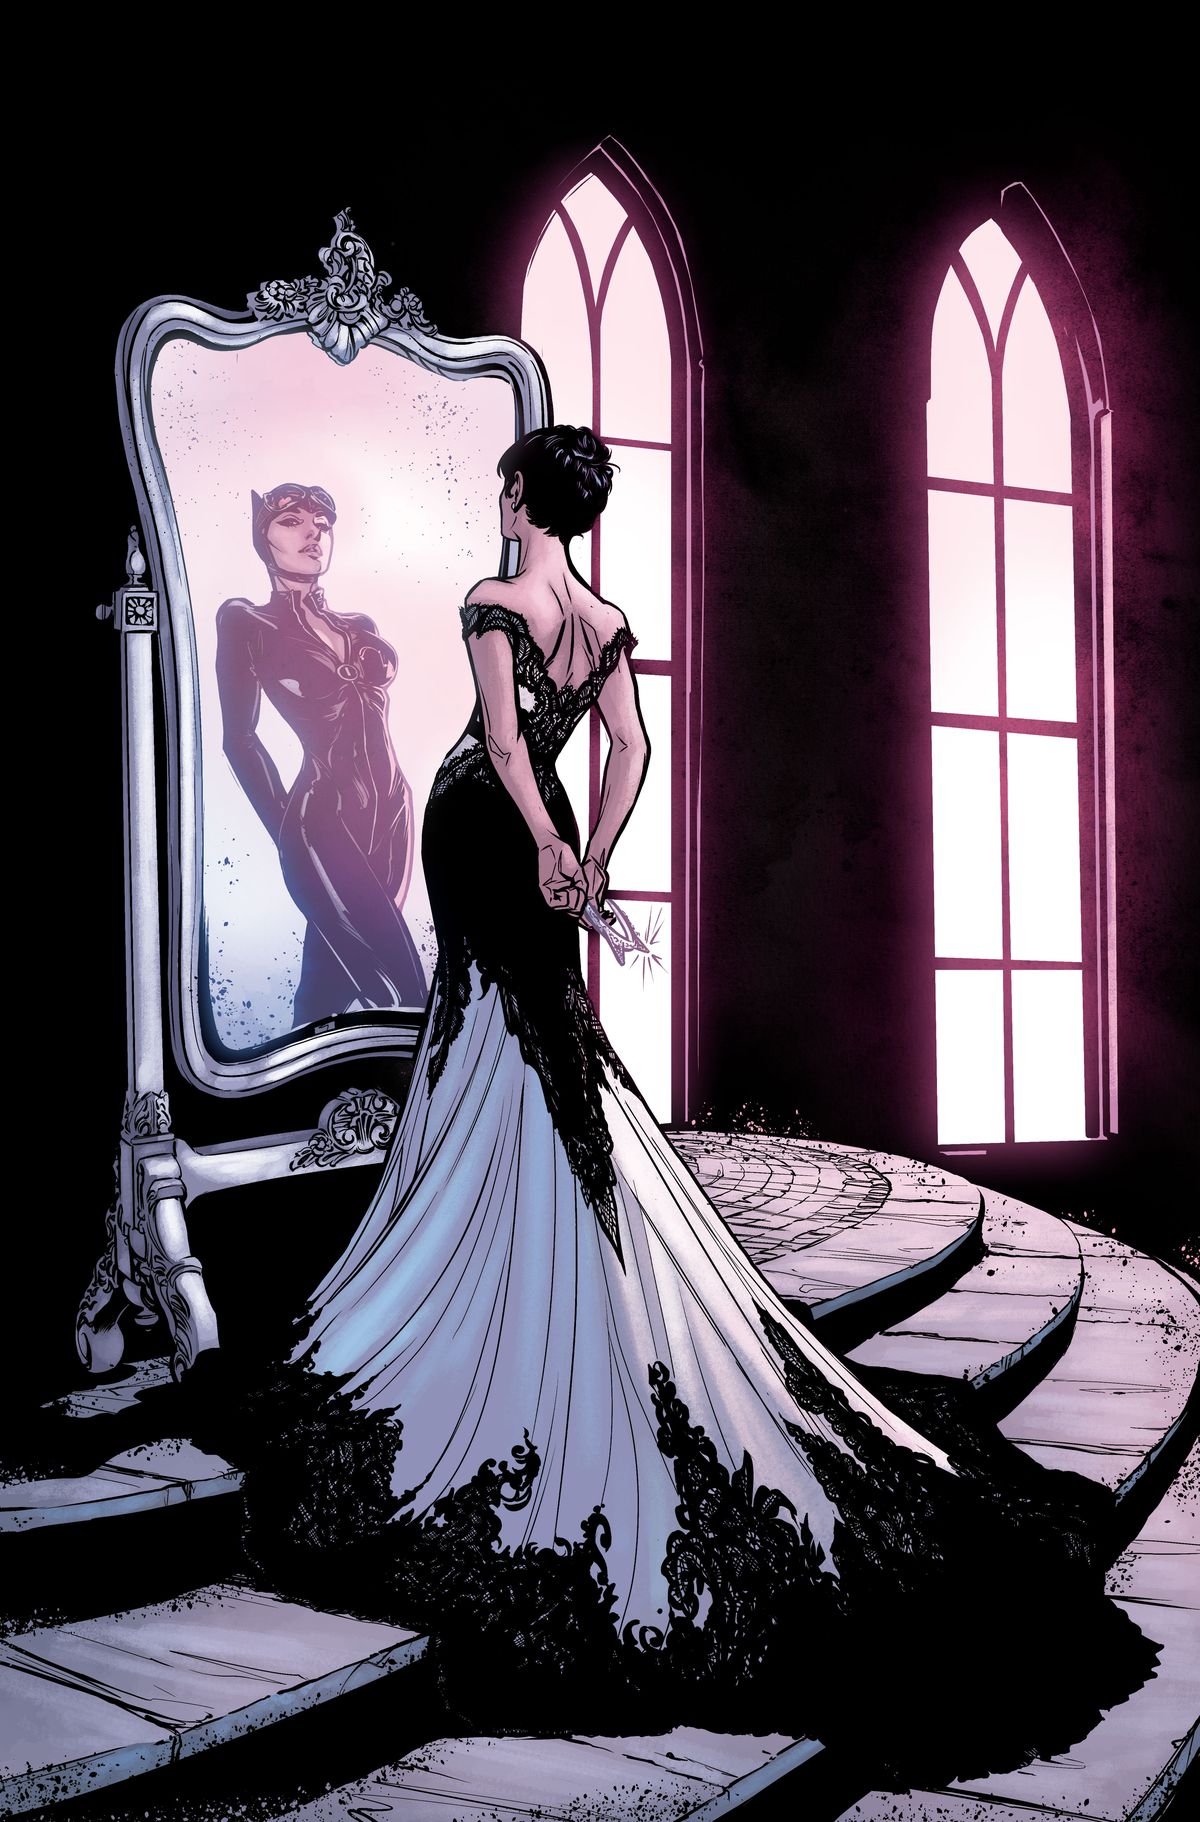 Get a first look at Catwoman’s wedding dress